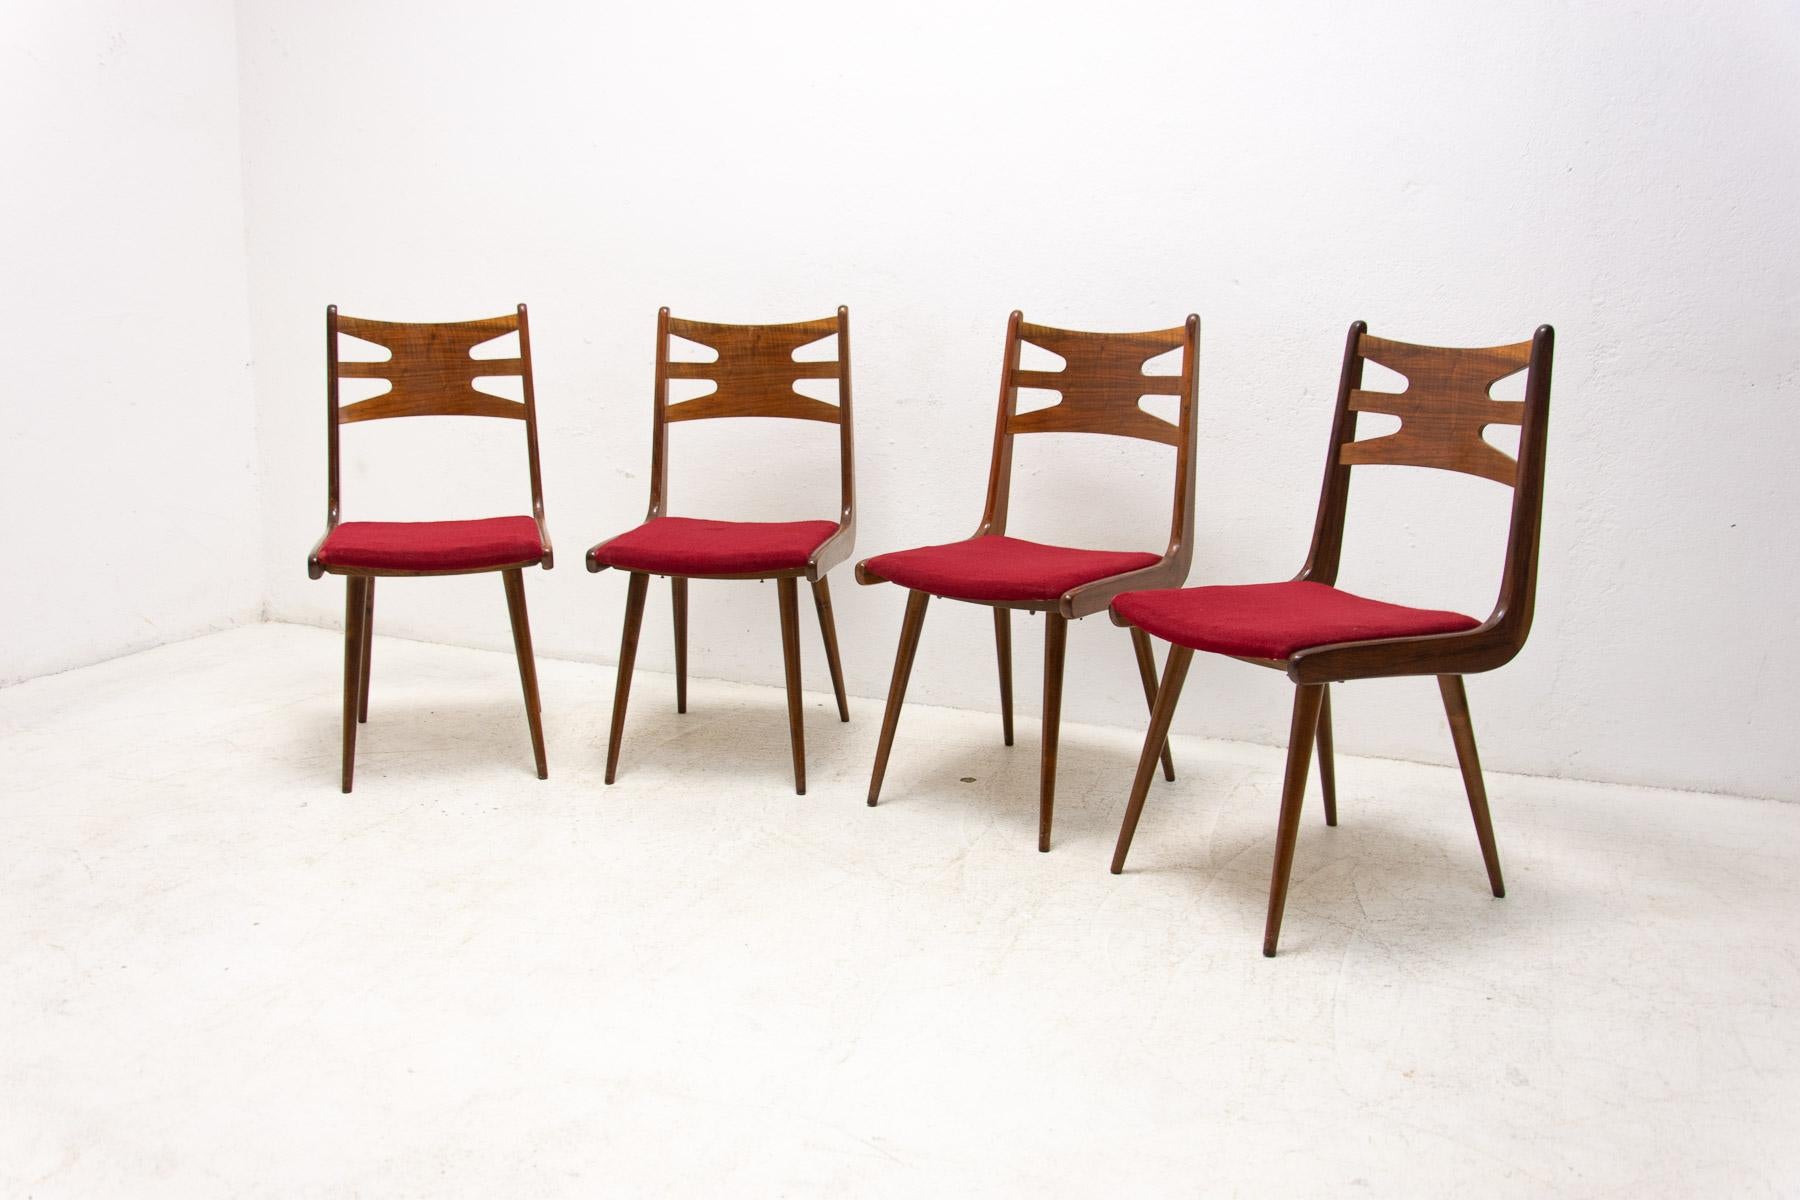 20th Century Set of Upholstered Walnut Dining Chairs, 1970s, Czechoslovakia For Sale